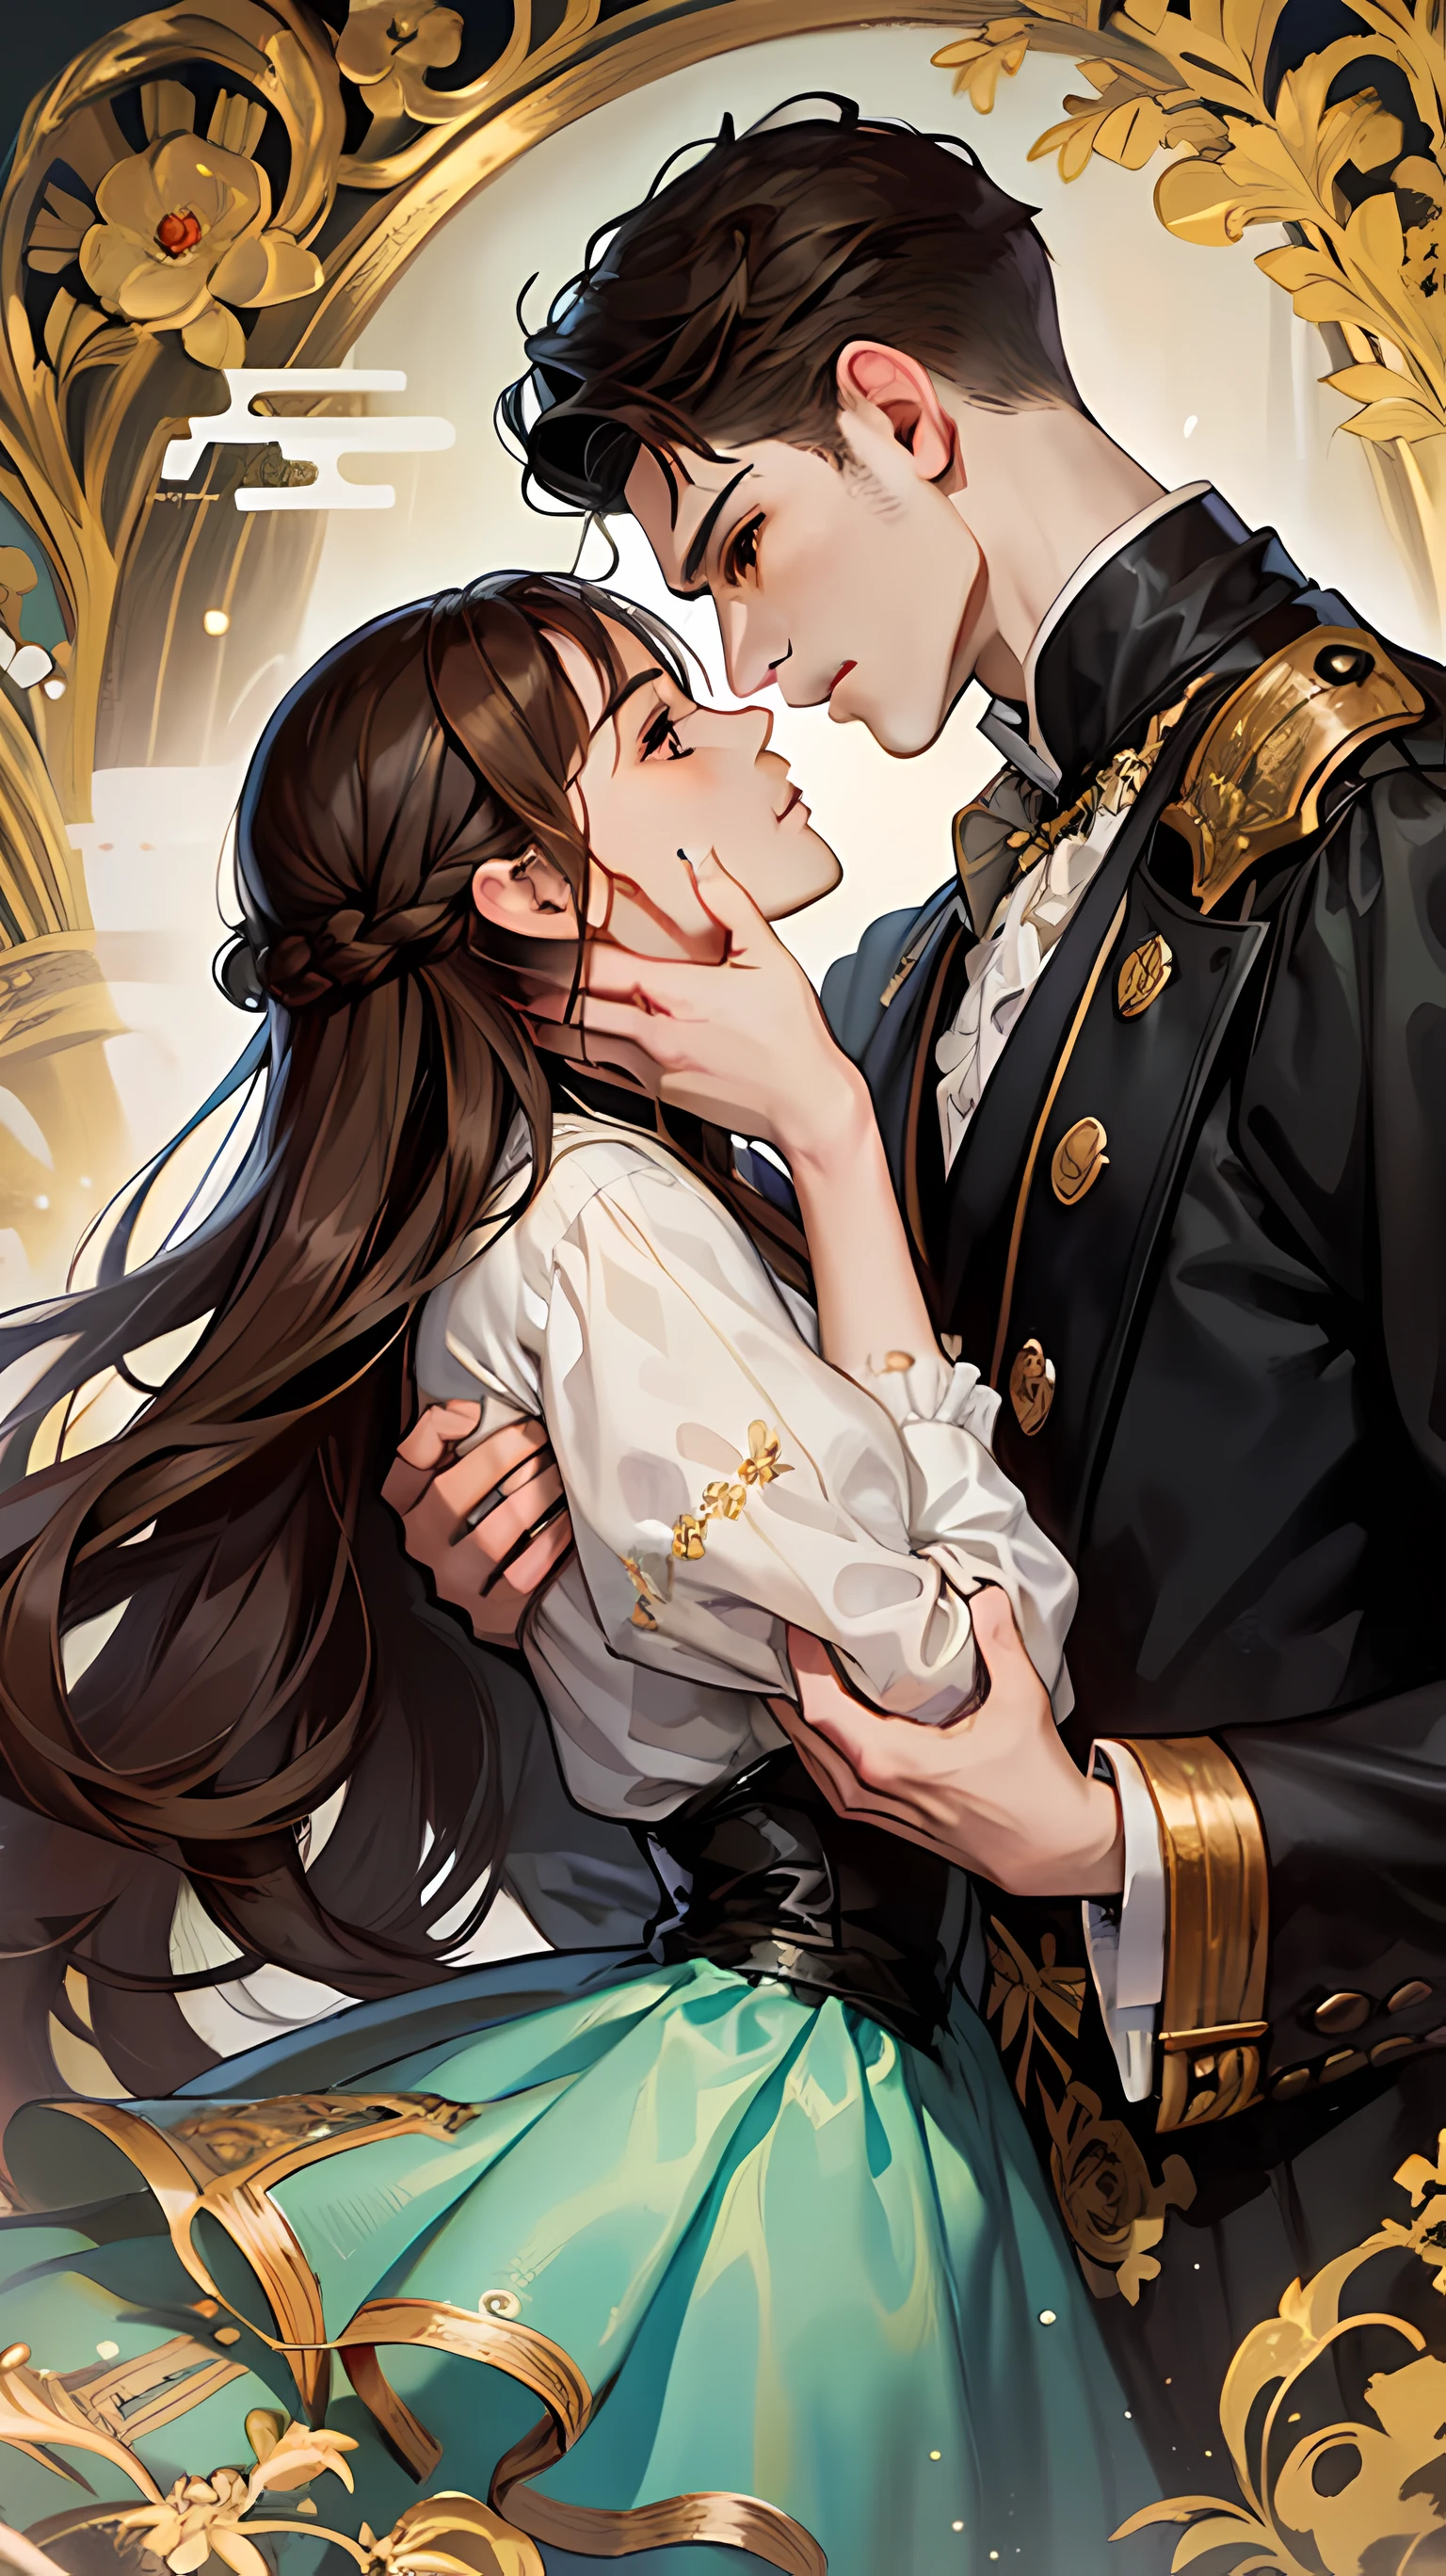 ((Masterpieces)), Best quality, outstanding illustration, A couple kissing, Soft focus, 1 man with long brown hair, Red eyes, 1 girl with long black hair, Brown eyes, Victorian clothes, Victorian romanticism, opulent and exquisite atmosphere, soft light and warm lighting. (((Specific characteristics)))